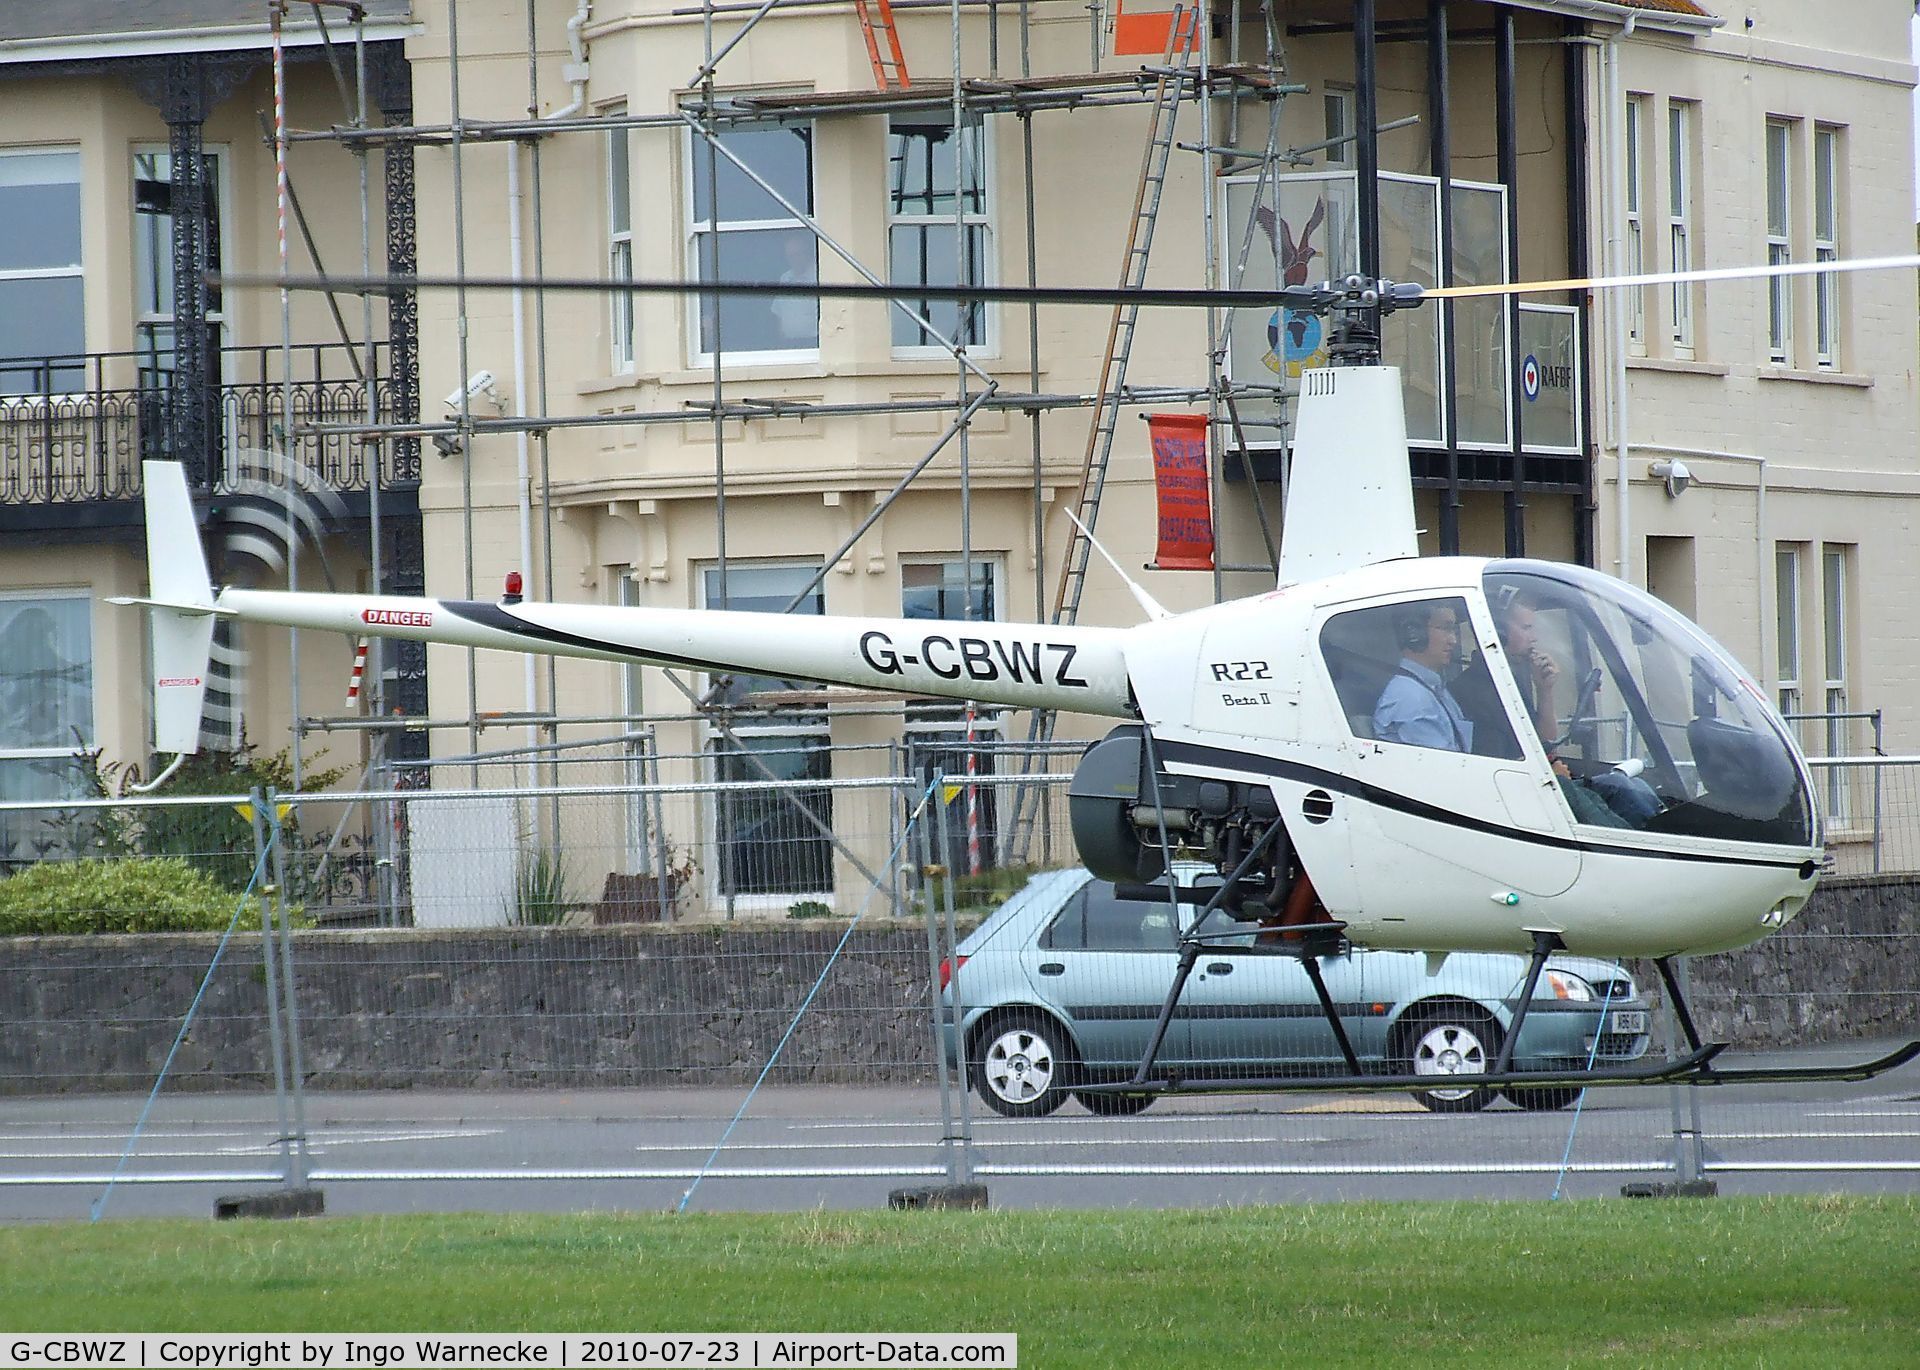 G-CBWZ, 2000 Robinson R22 Beta C/N 3101, Robinson R22 Beta at the 2010 Helidays on the Weston-super-Mare seafront